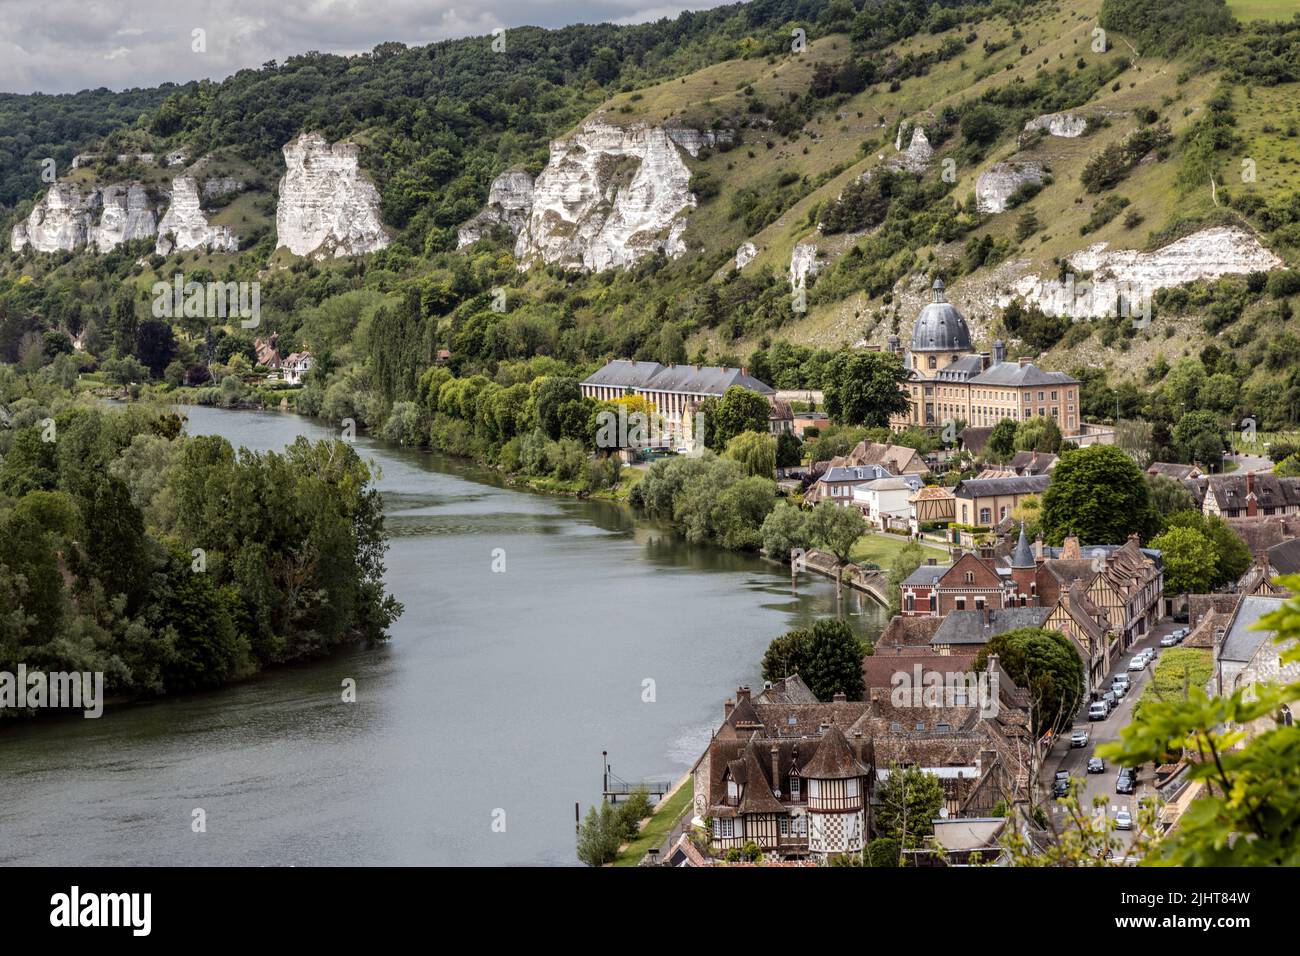 View of the River Seine from the Chateau Gaillard in Les Andelys Stock Photo